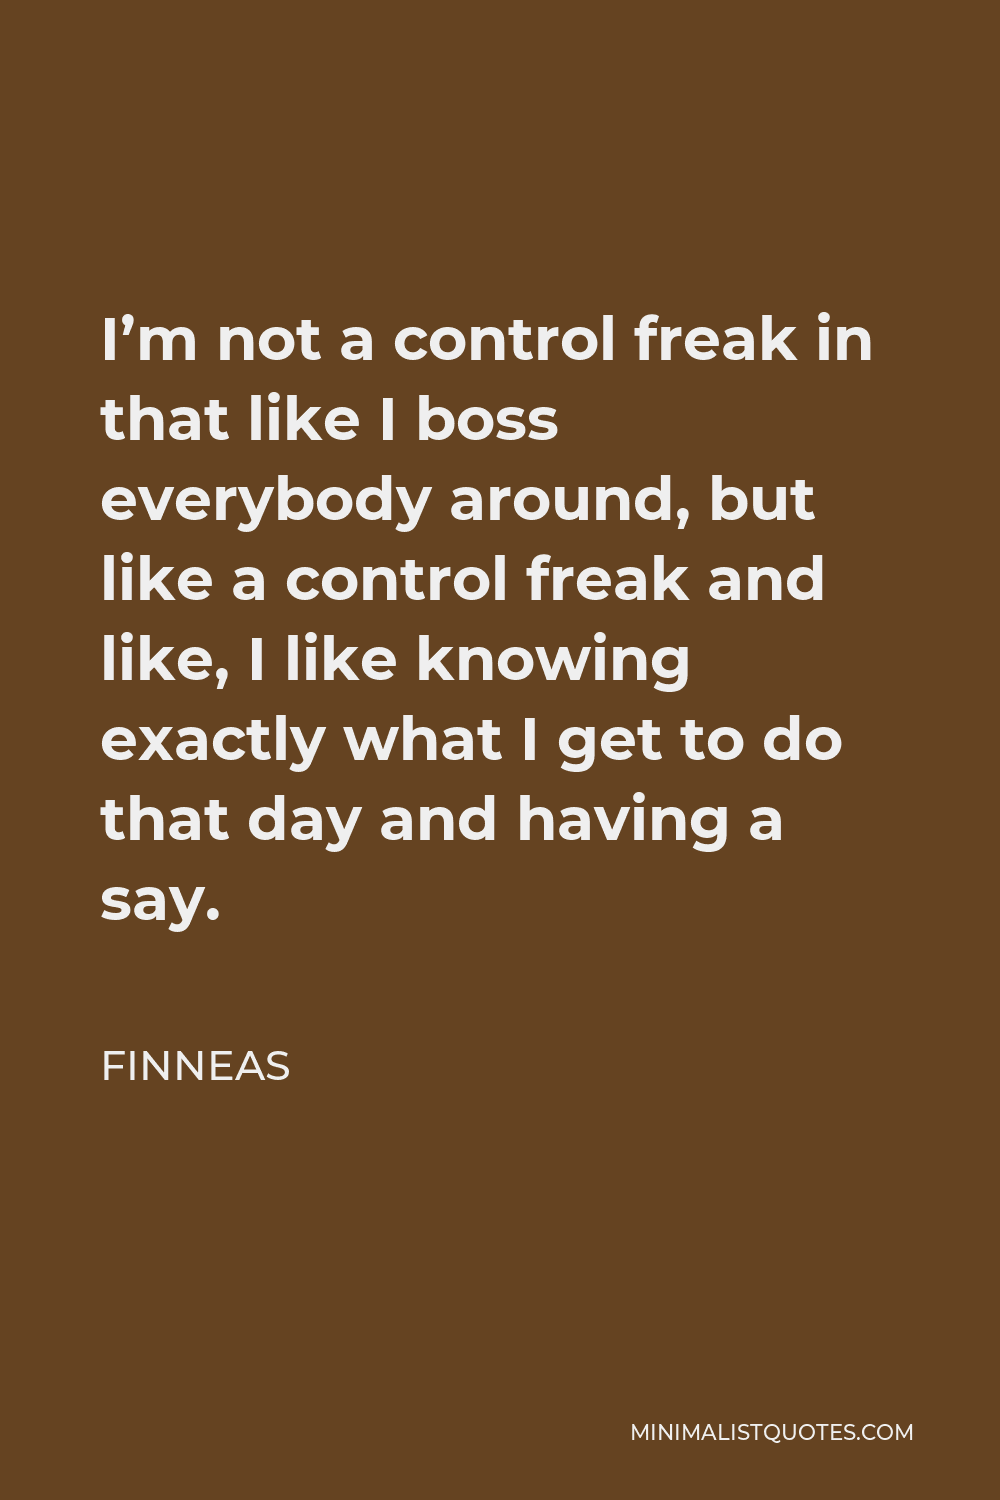 Finneas Quote - I’m not a control freak in that like I boss everybody around, but like a control freak and like, I like knowing exactly what I get to do that day and having a say.